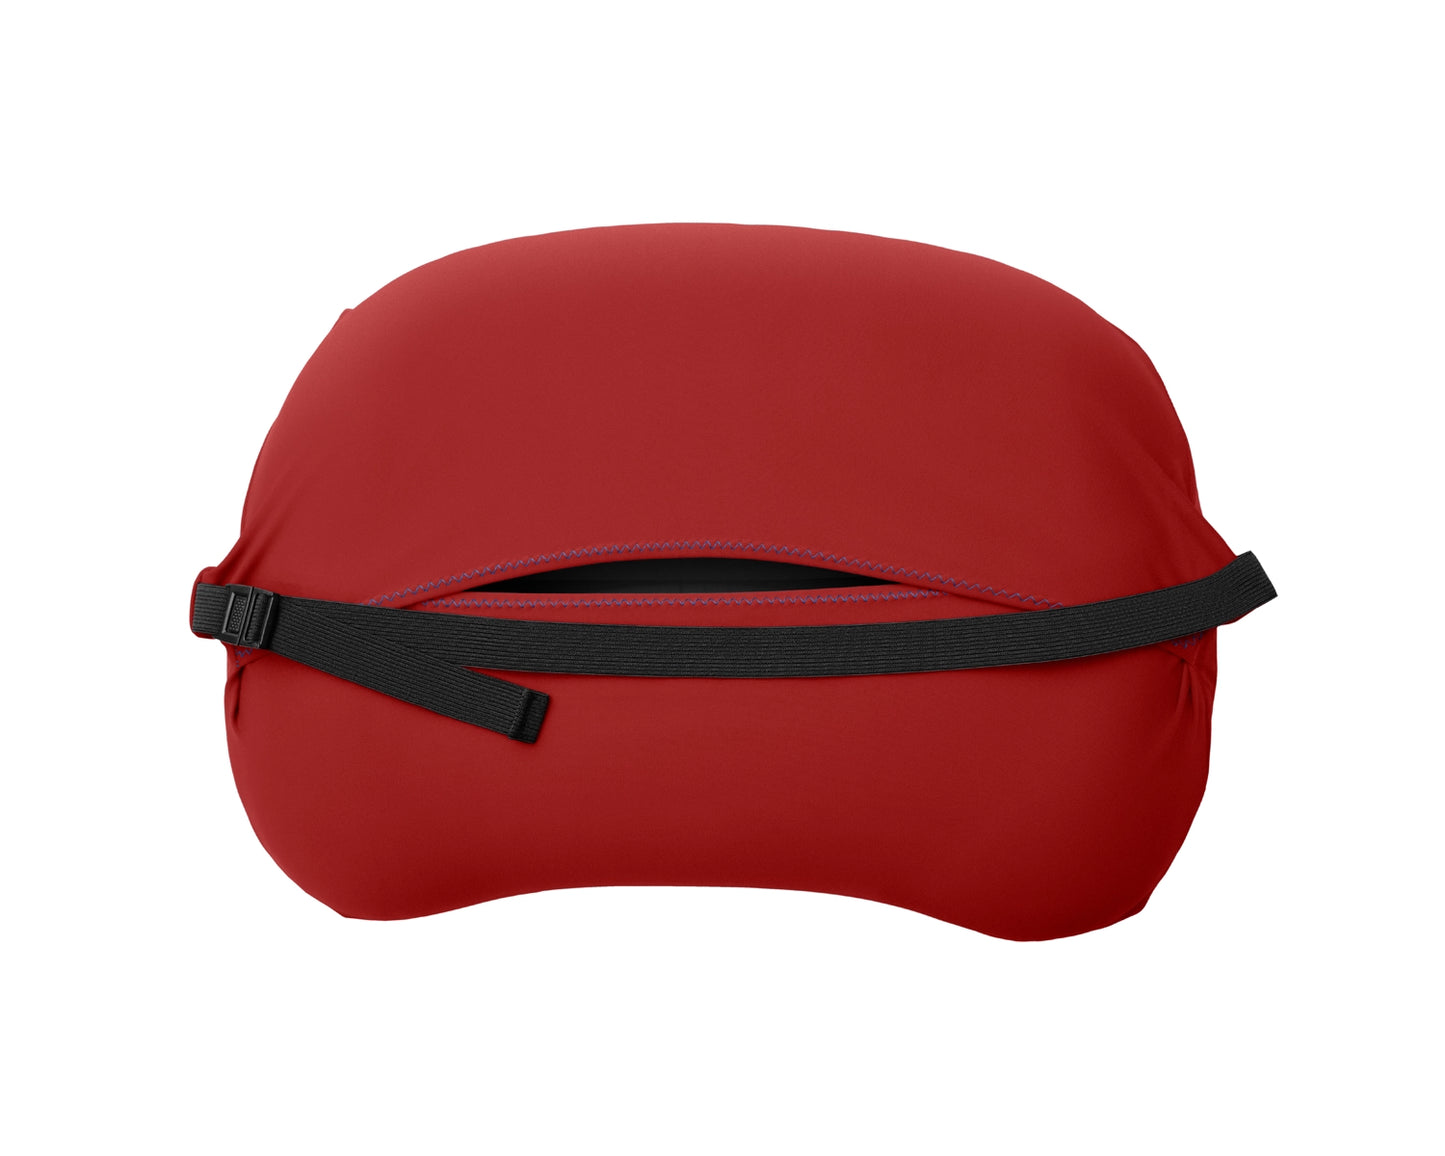 Trifold enclosure and strap of medium in red Pillow Strap to securely hold camp pillow to sleeping pad.